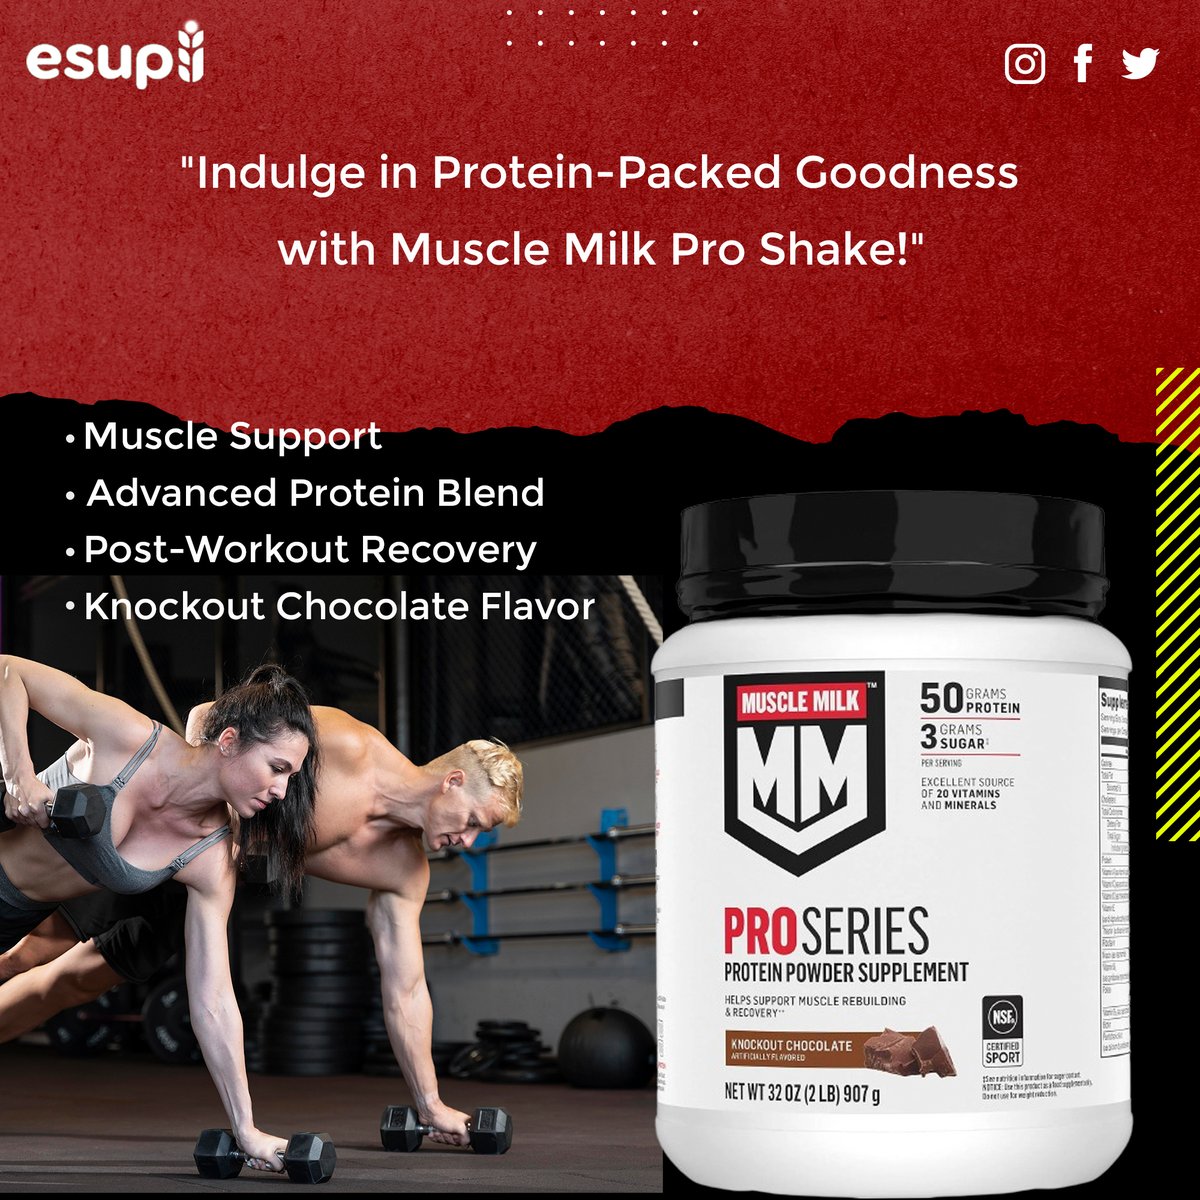 'Fuel your workouts with Muscle Milk Pro Series Protein Powder in Knockout Chocolate! NSF Certified for Sport!'

Buy Now - esupli.com/products/muscl…

#esupli #musclefood #ProSeries #proteinpowder #musclemilk #proshake #Supplements #musclehealth #postworkout